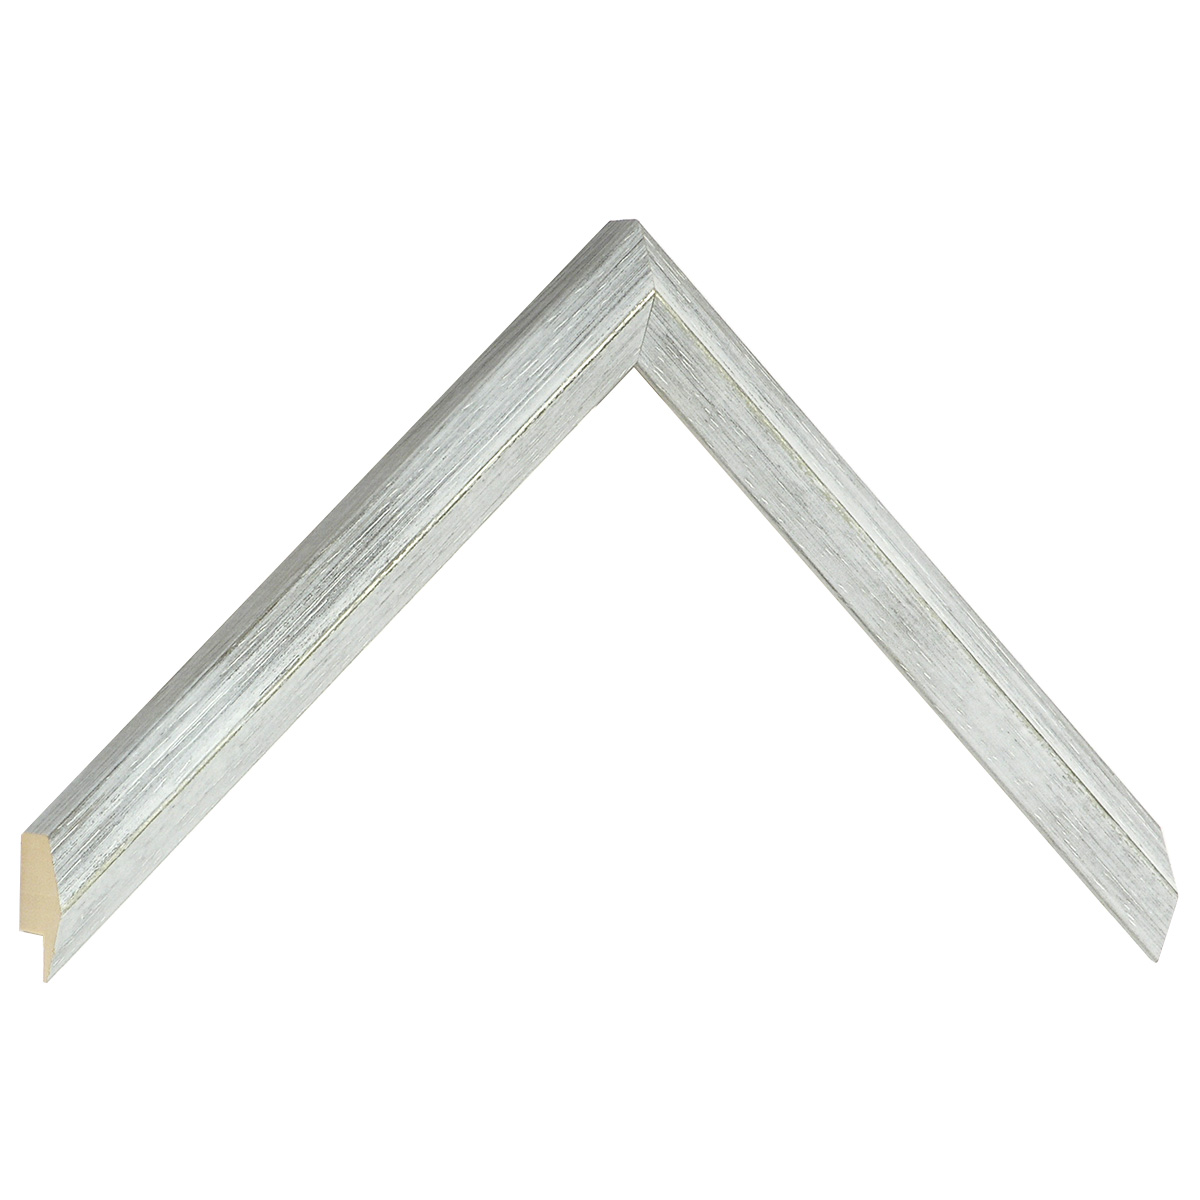 Moulding ayous - height 21mm - widht 18mm - White - Sample